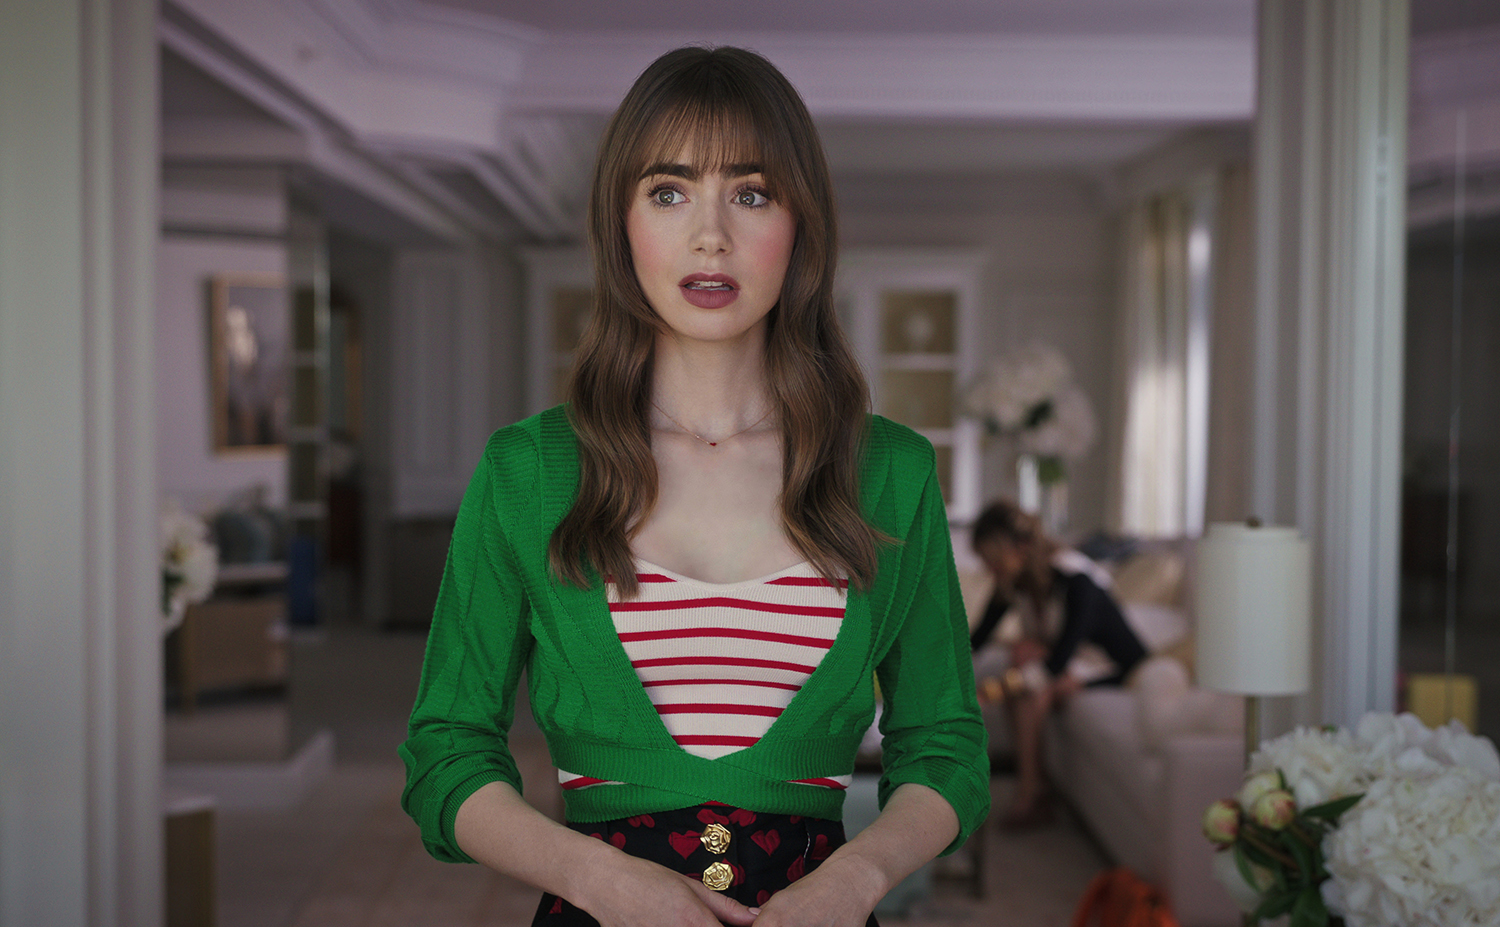 Emily in Paris Season 3: Lily Collins as Emily Cooper wearing a red and white striped tank top with a bright green shirt and looking shocked.